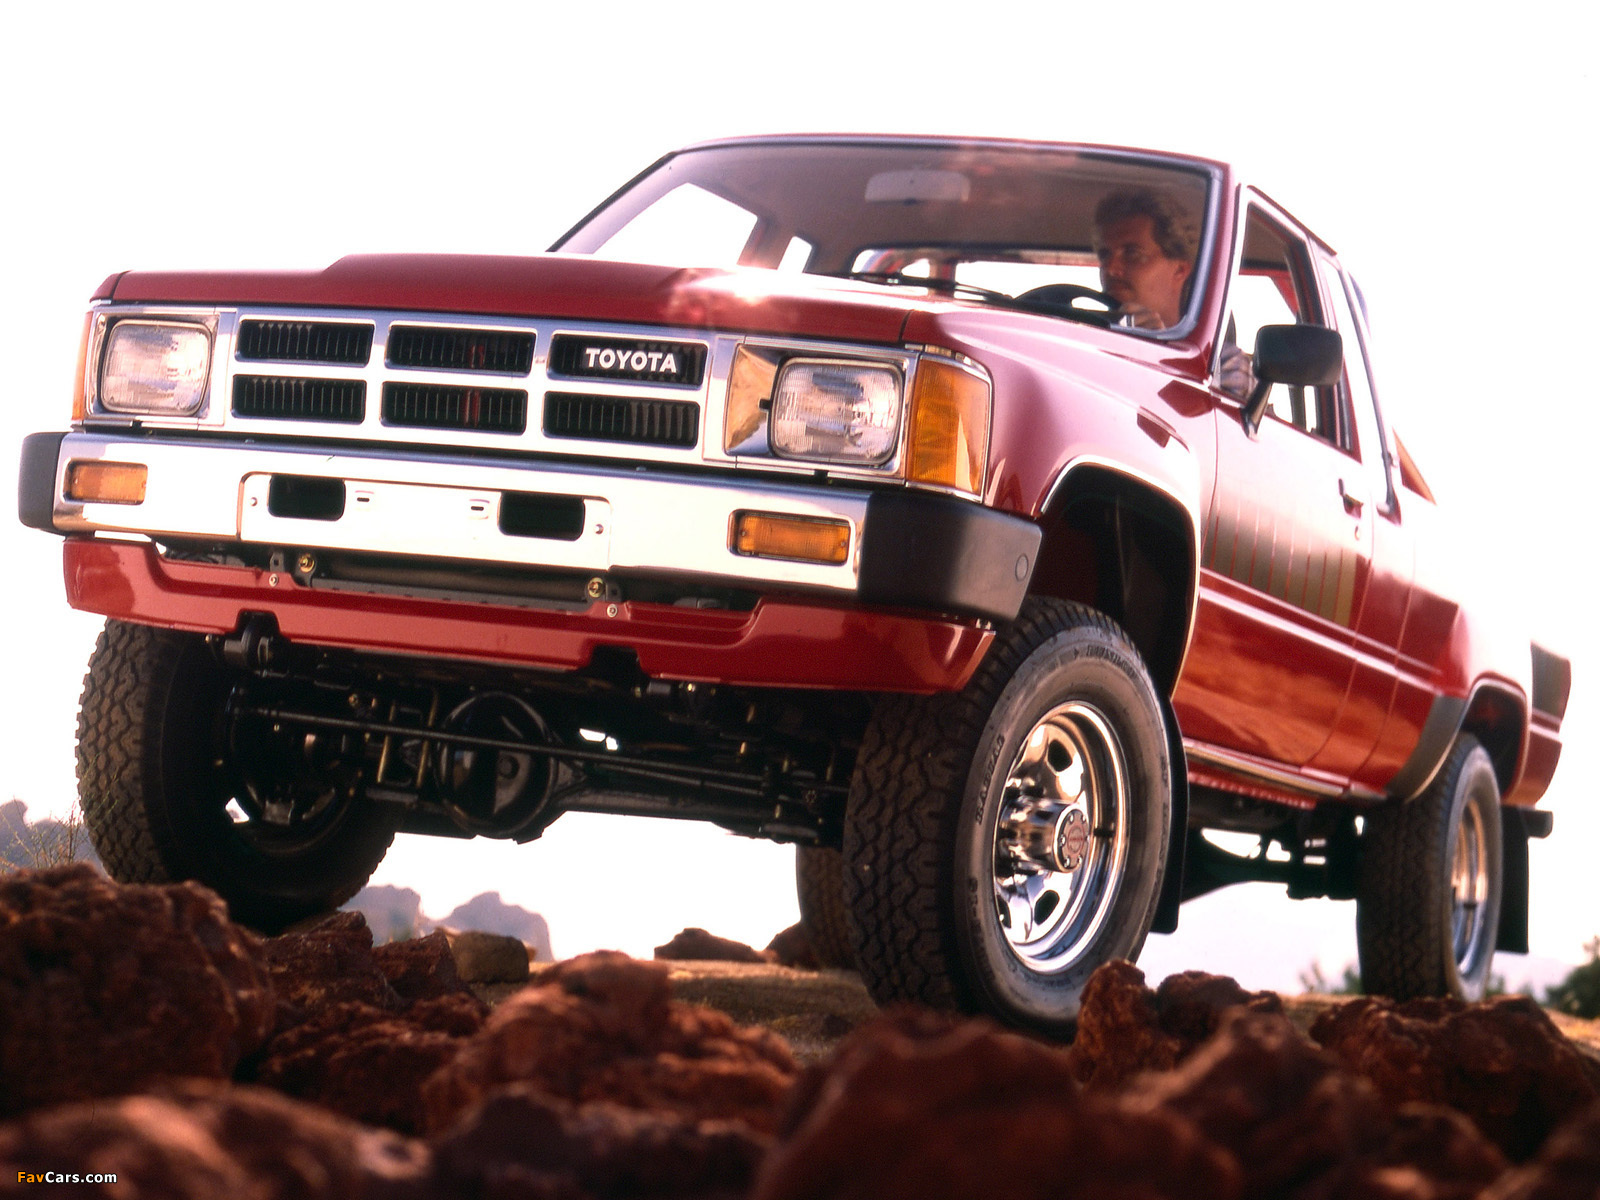 Wallpapers of Toyota Truck Xtracab 4WD 198486 1600 x 1200